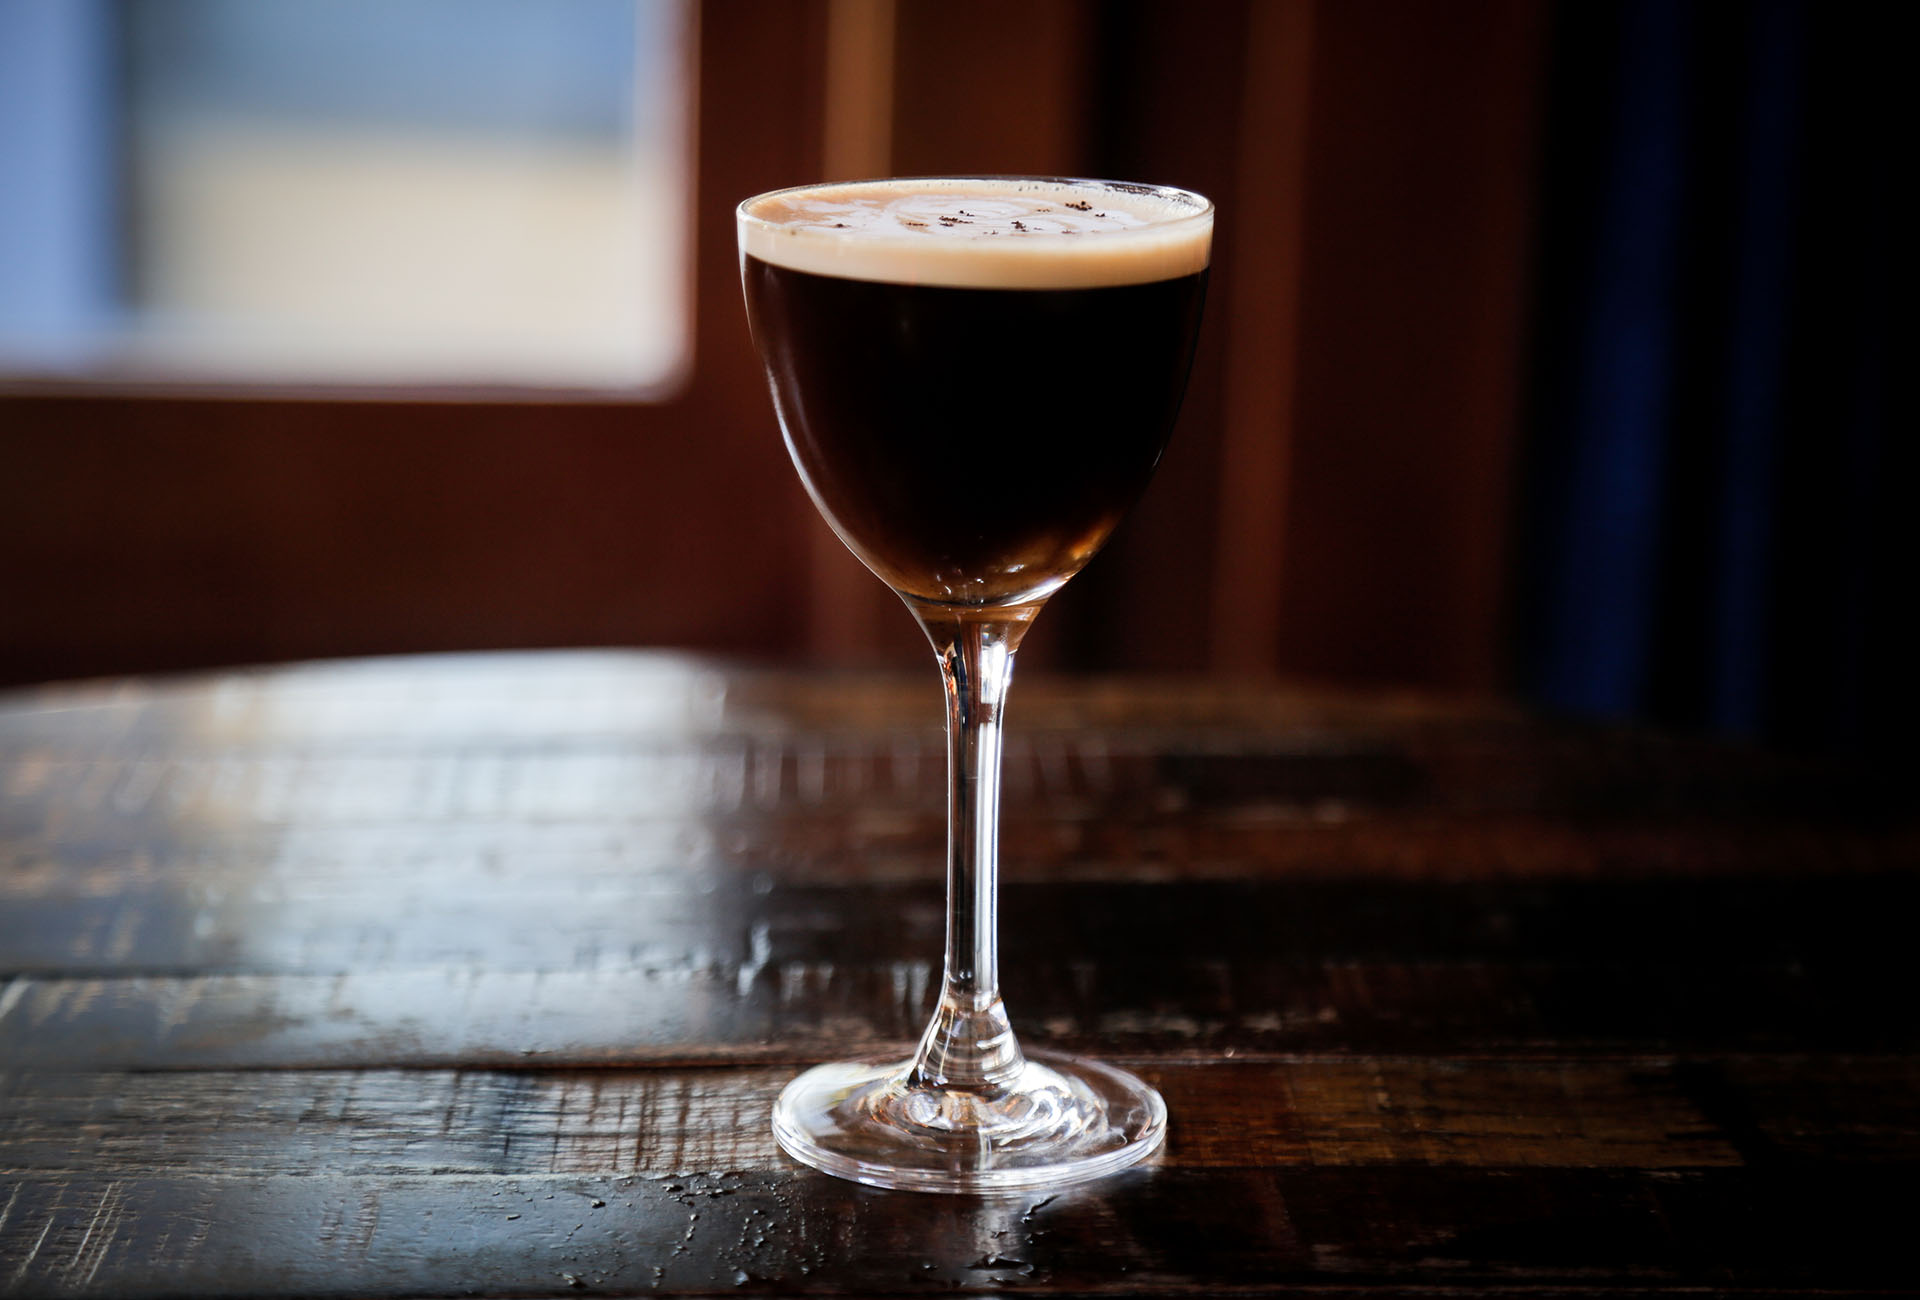 The Sylvester named for the famous singer and performer It's made with vodka, kahlua, vanilla, and espresso.